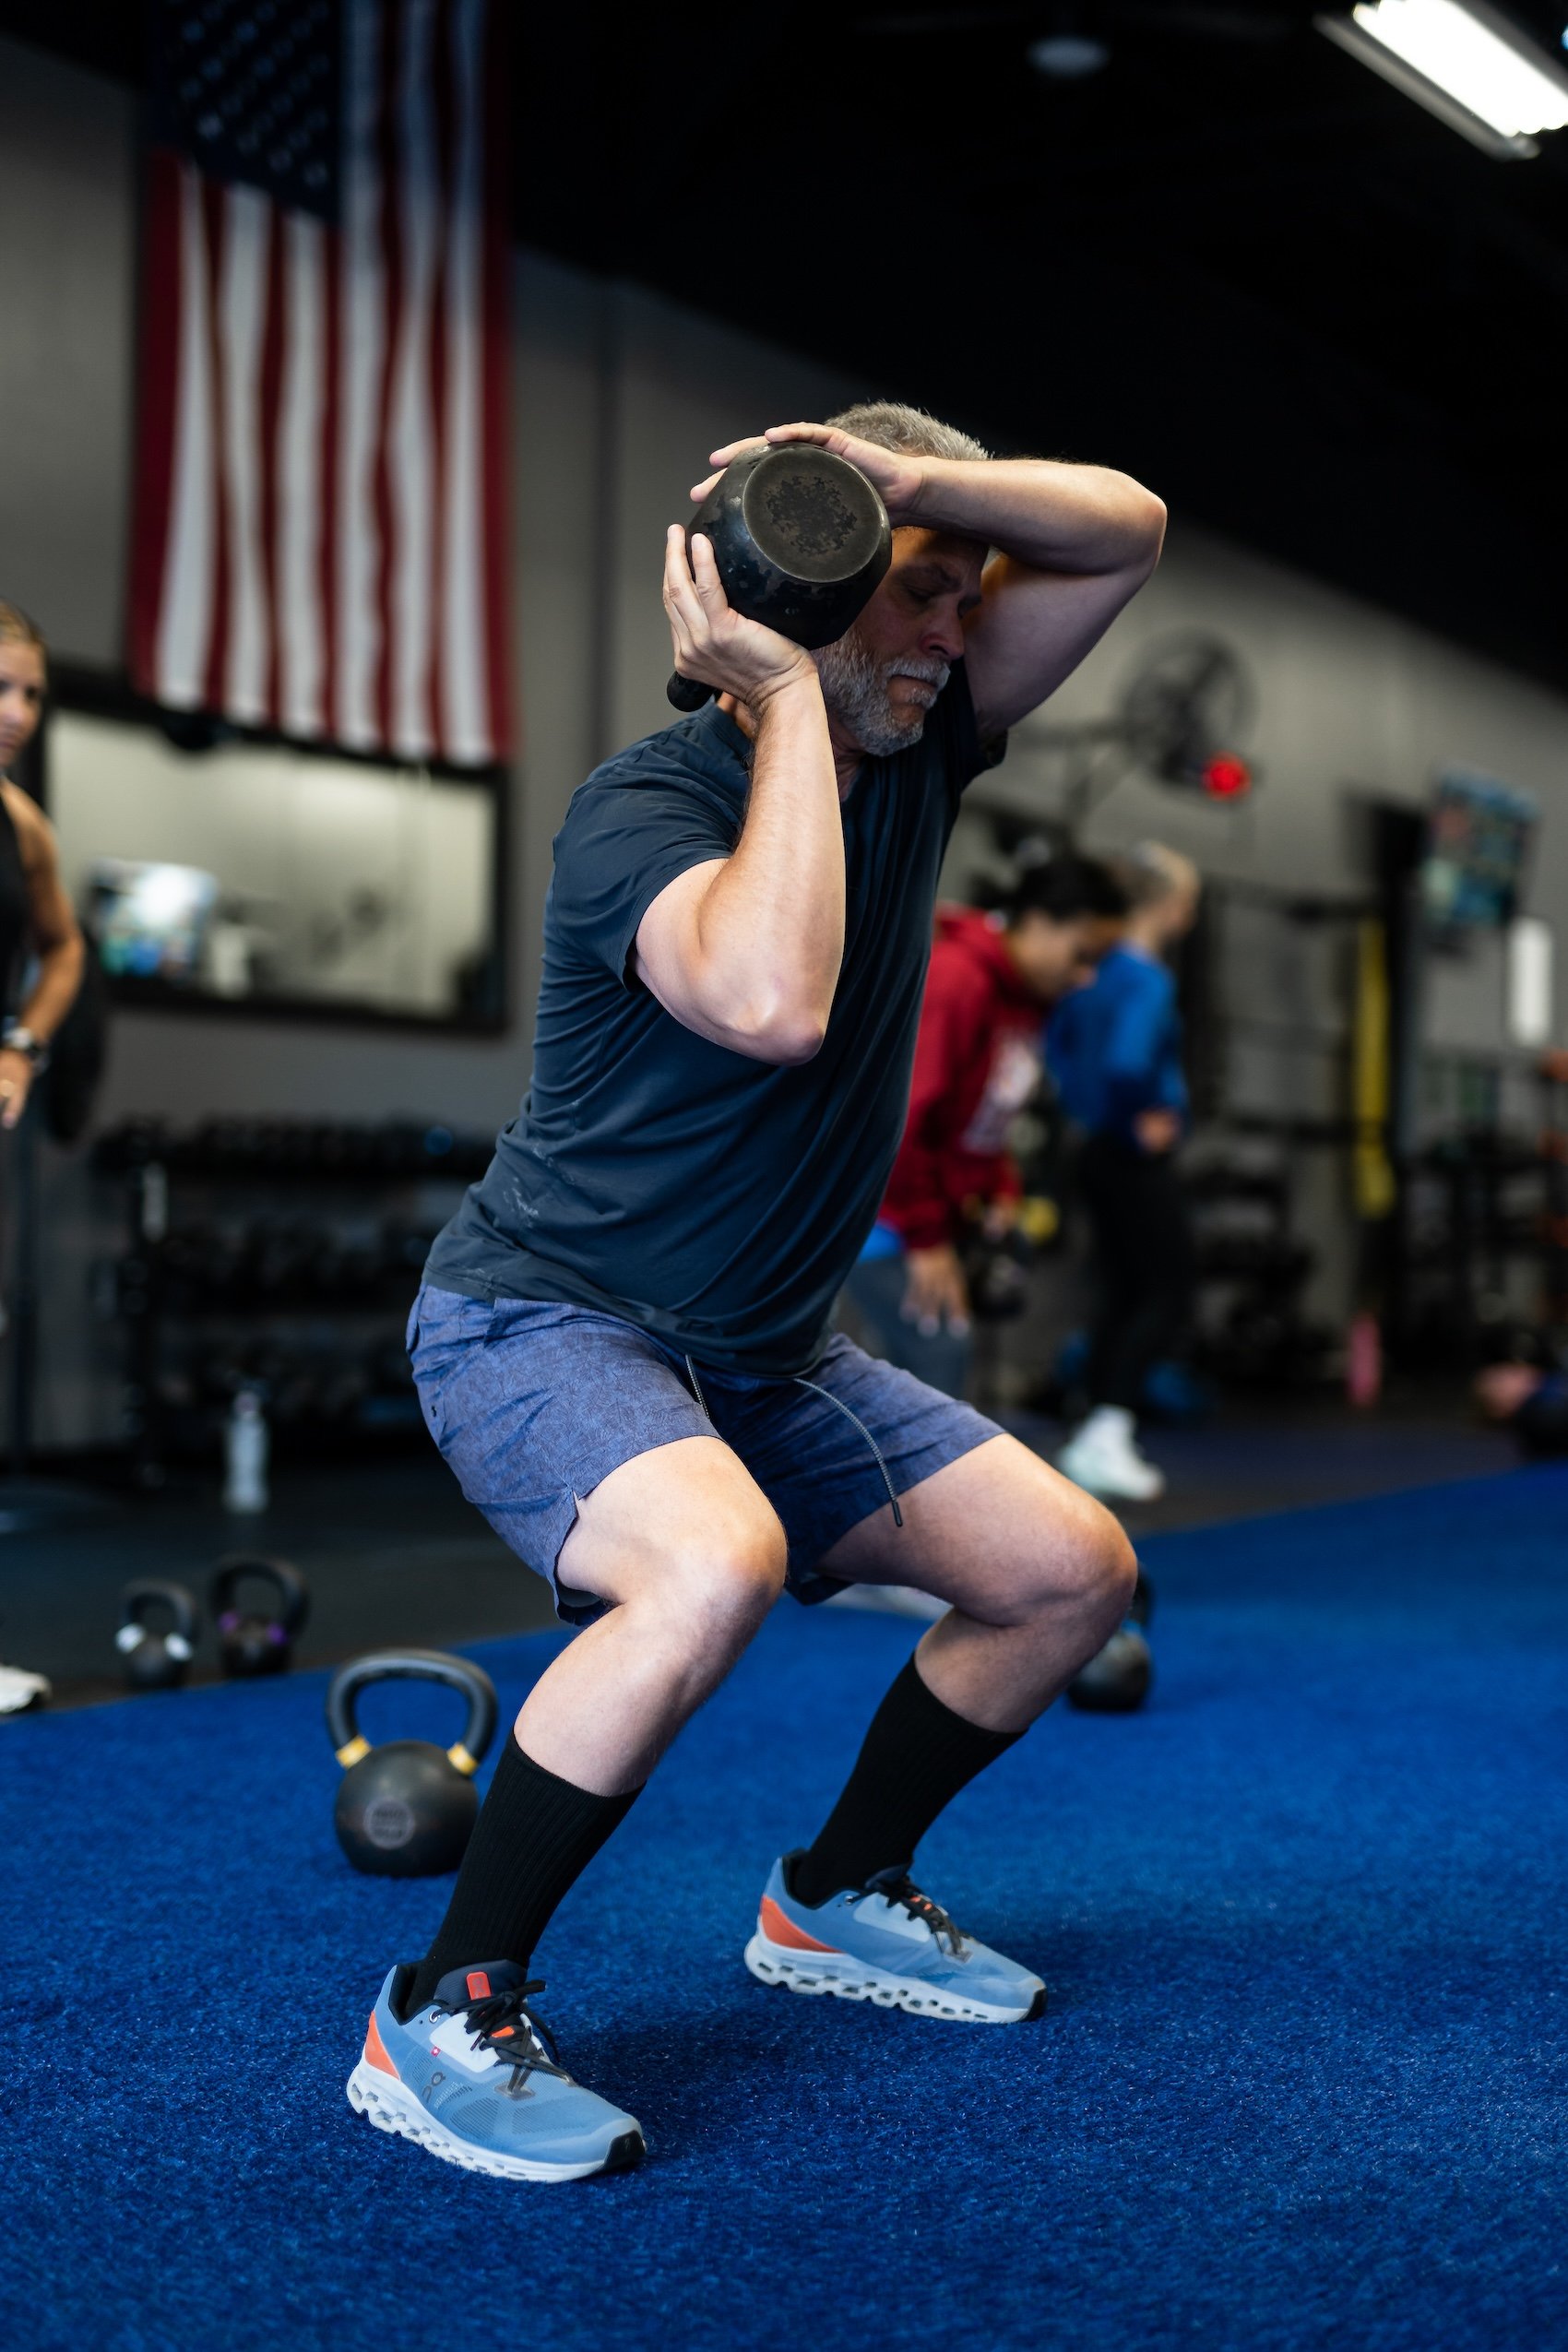 A man doing a squat with a kettlebell in a gym, working on his strength and fitness.